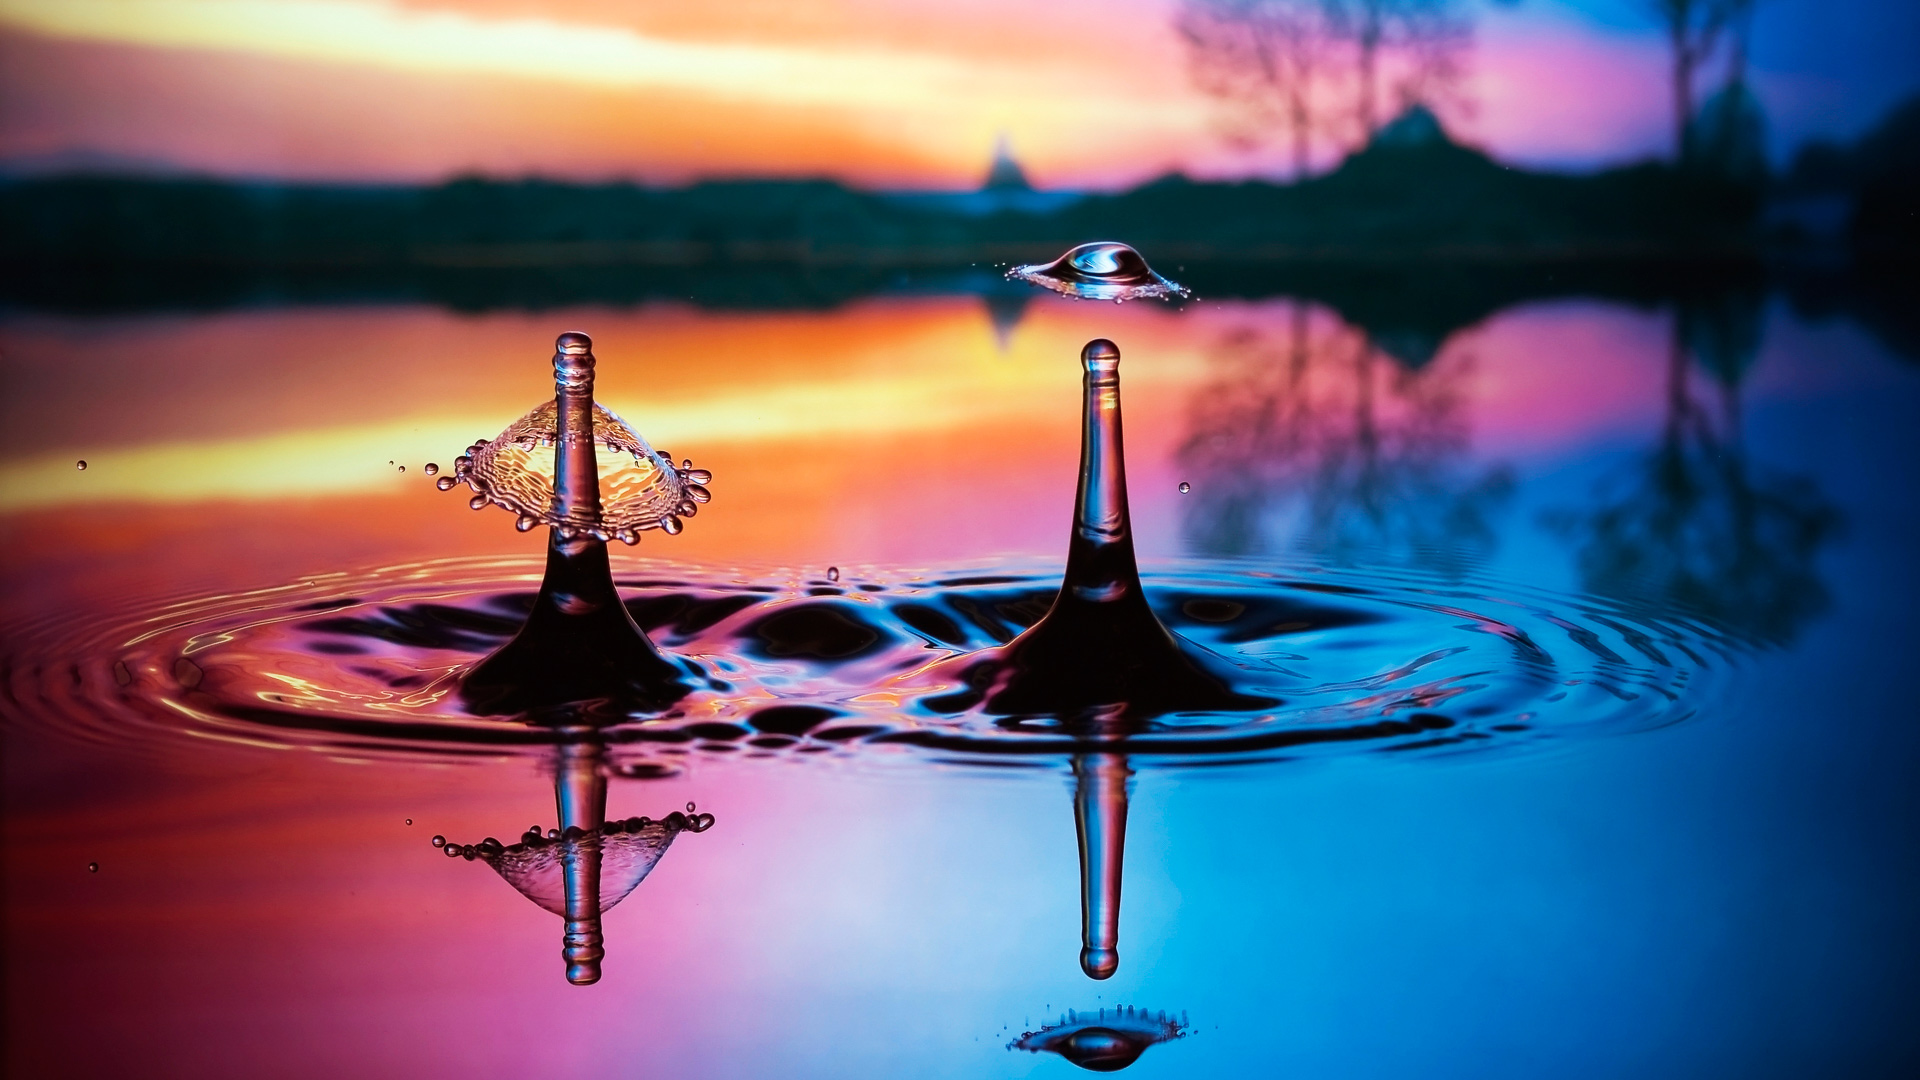 General 1920x1080 water drops macro depth of field water photography sunset